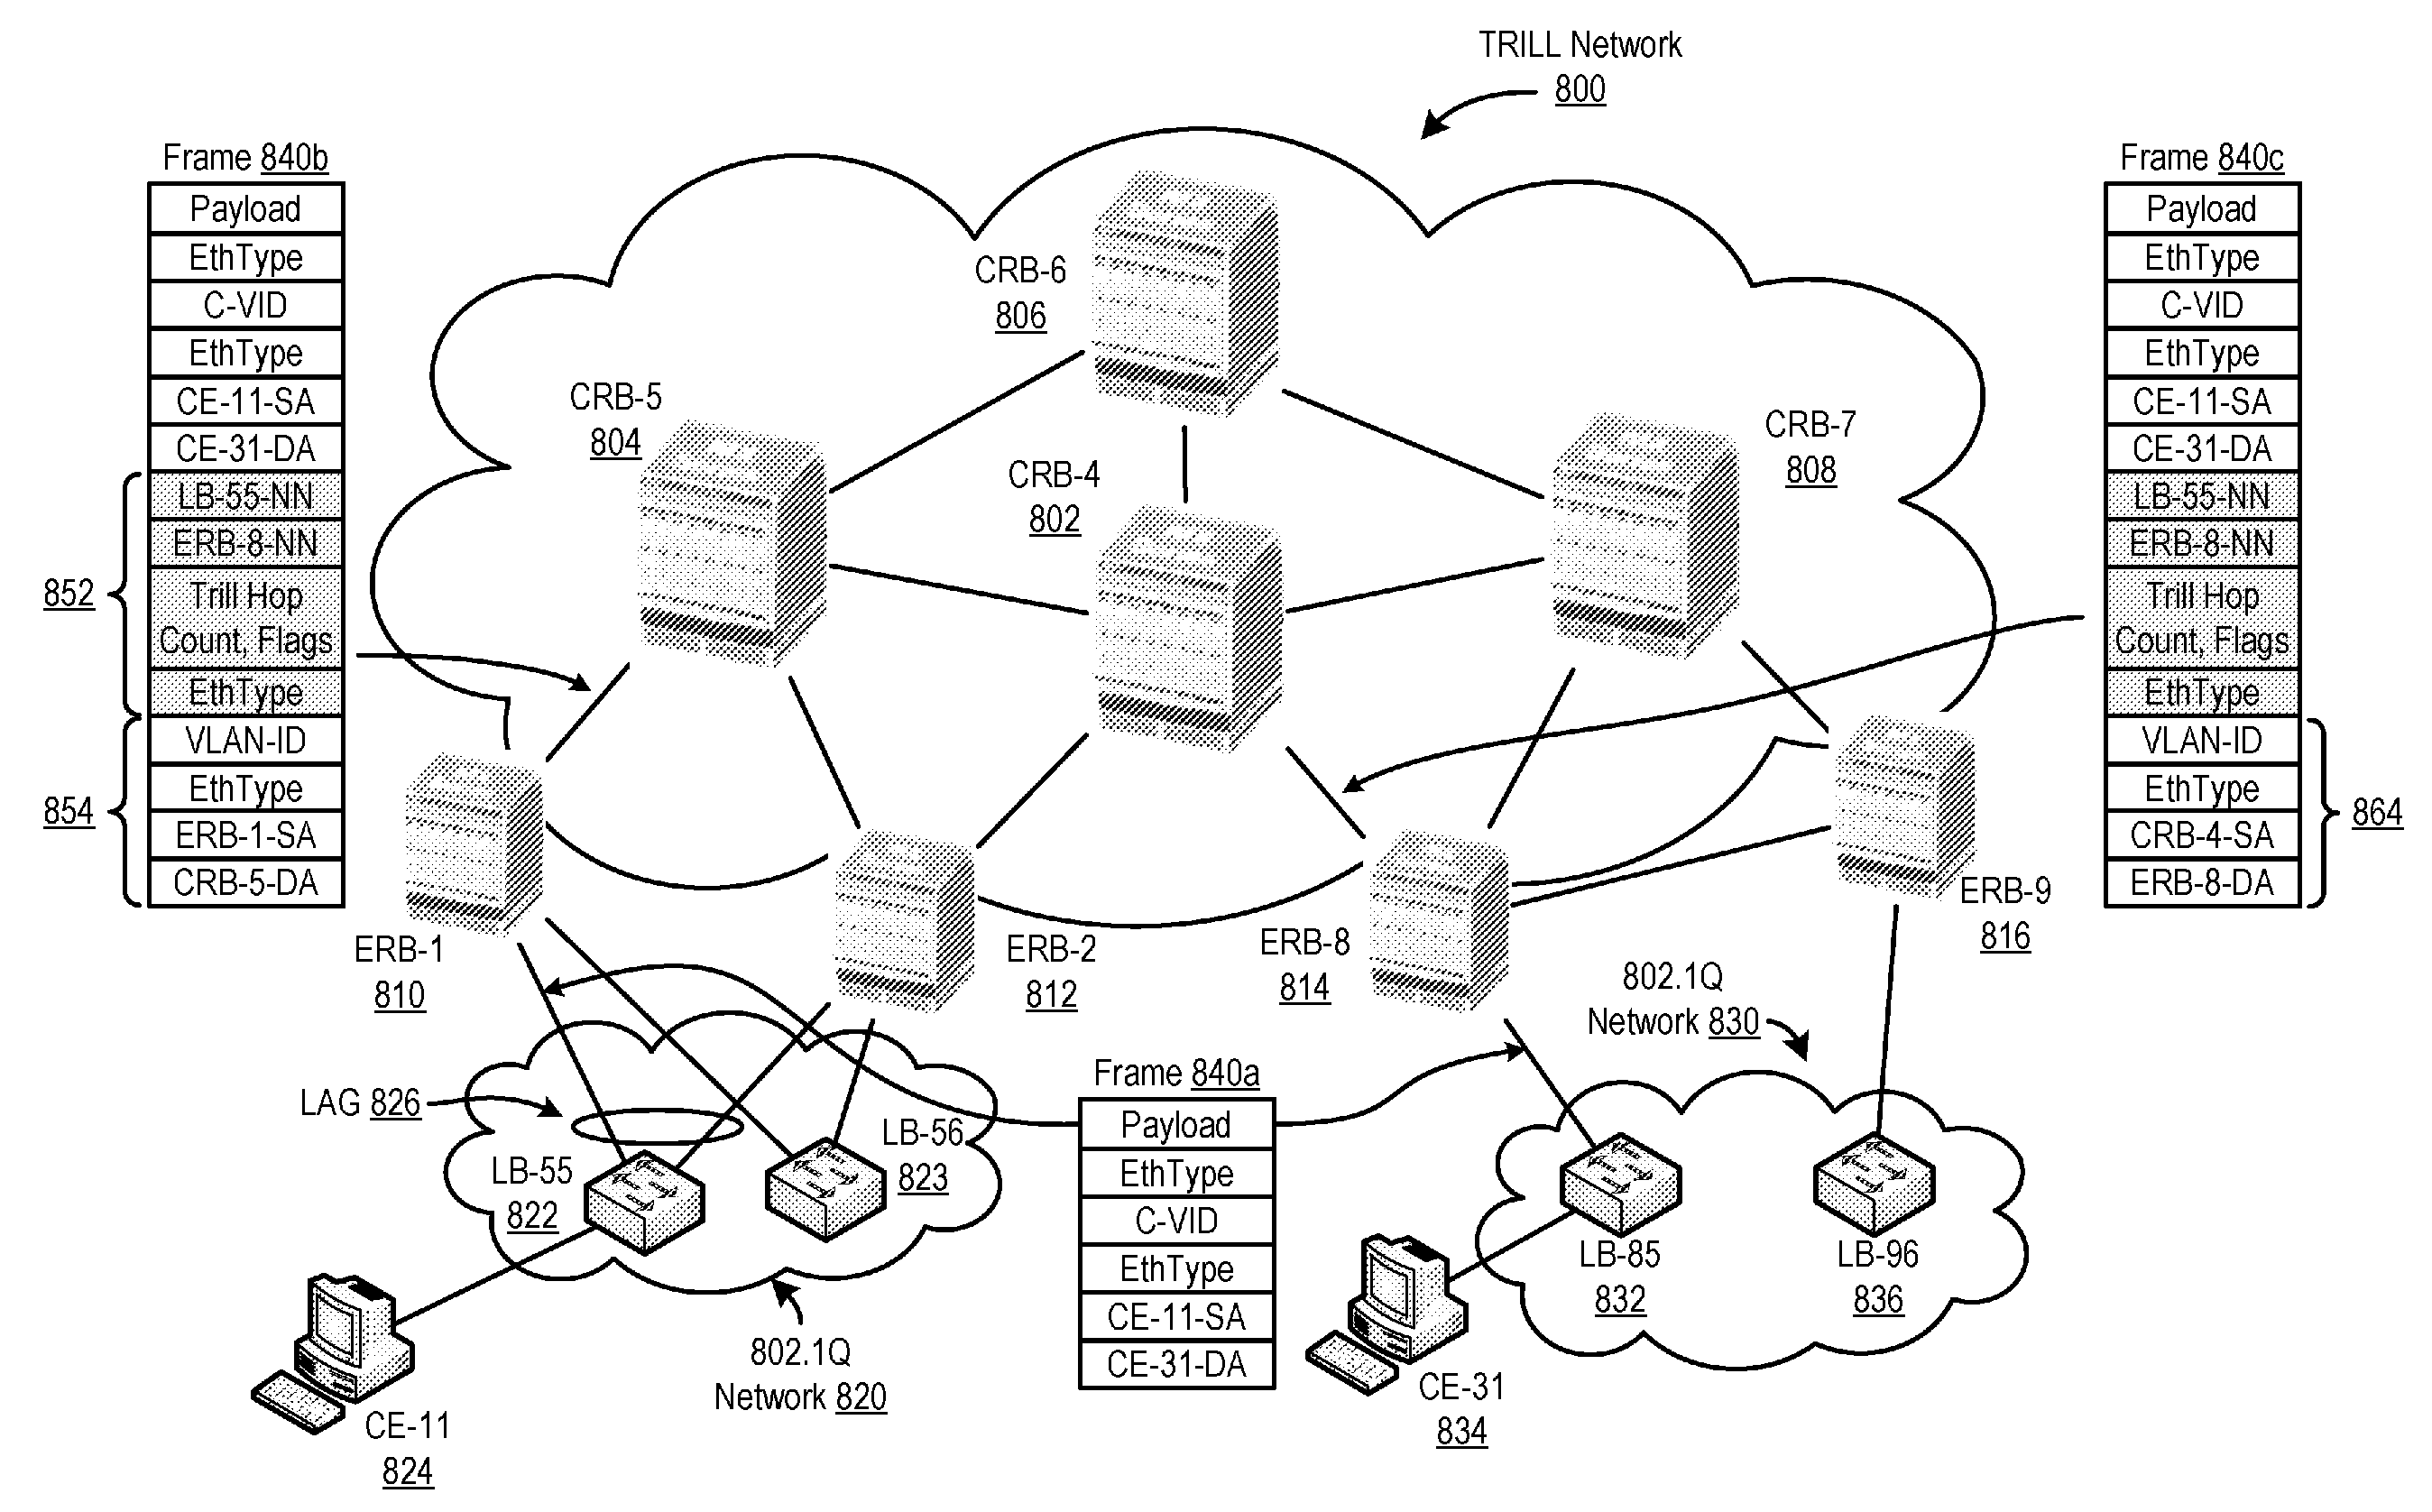 Routing frames in a shortest path computer network for a multi-homed legacy bridge node